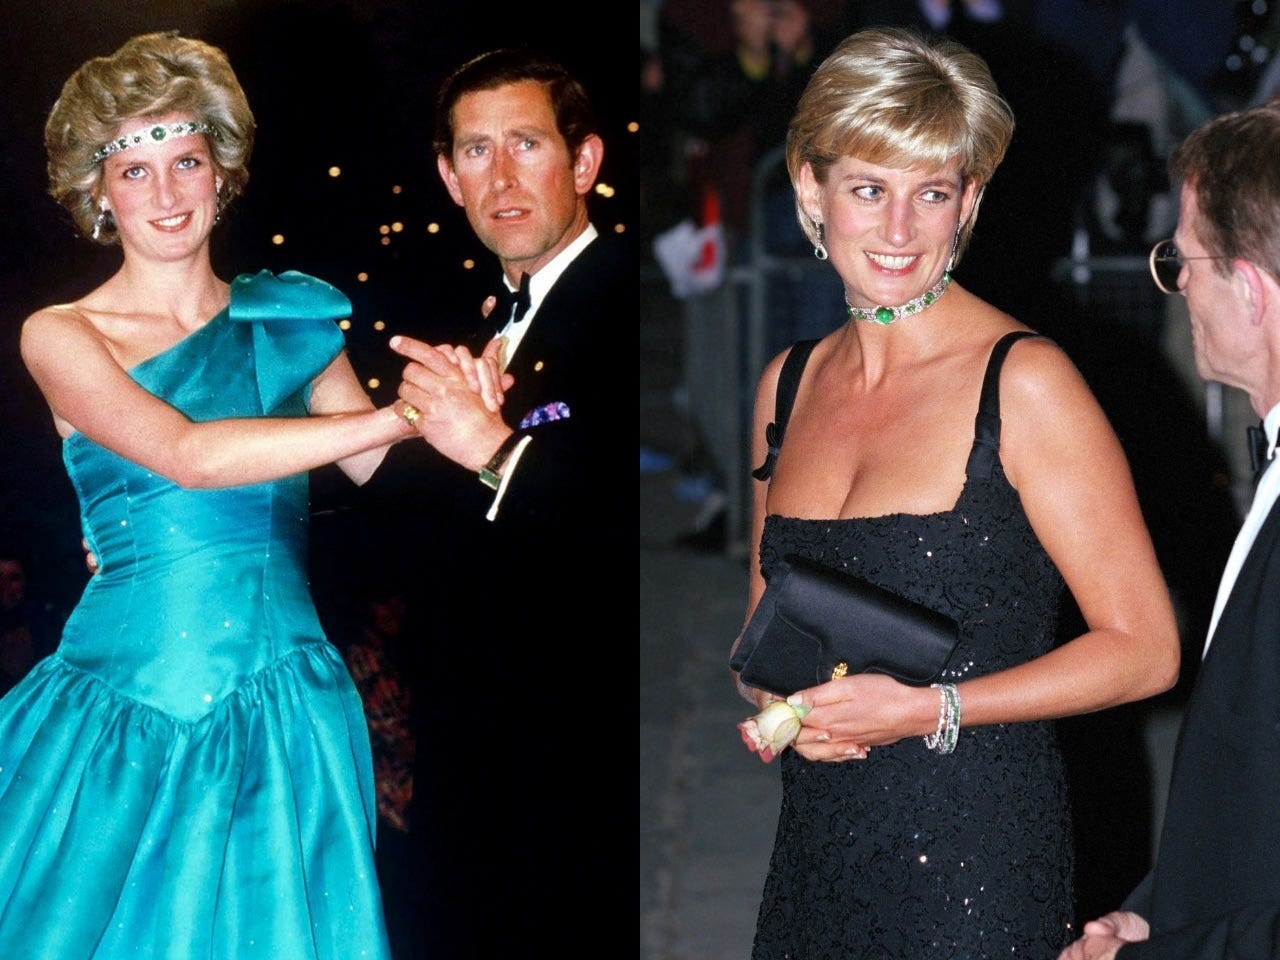 15 of the biggest fashion faux pas made by royals | Business Insider